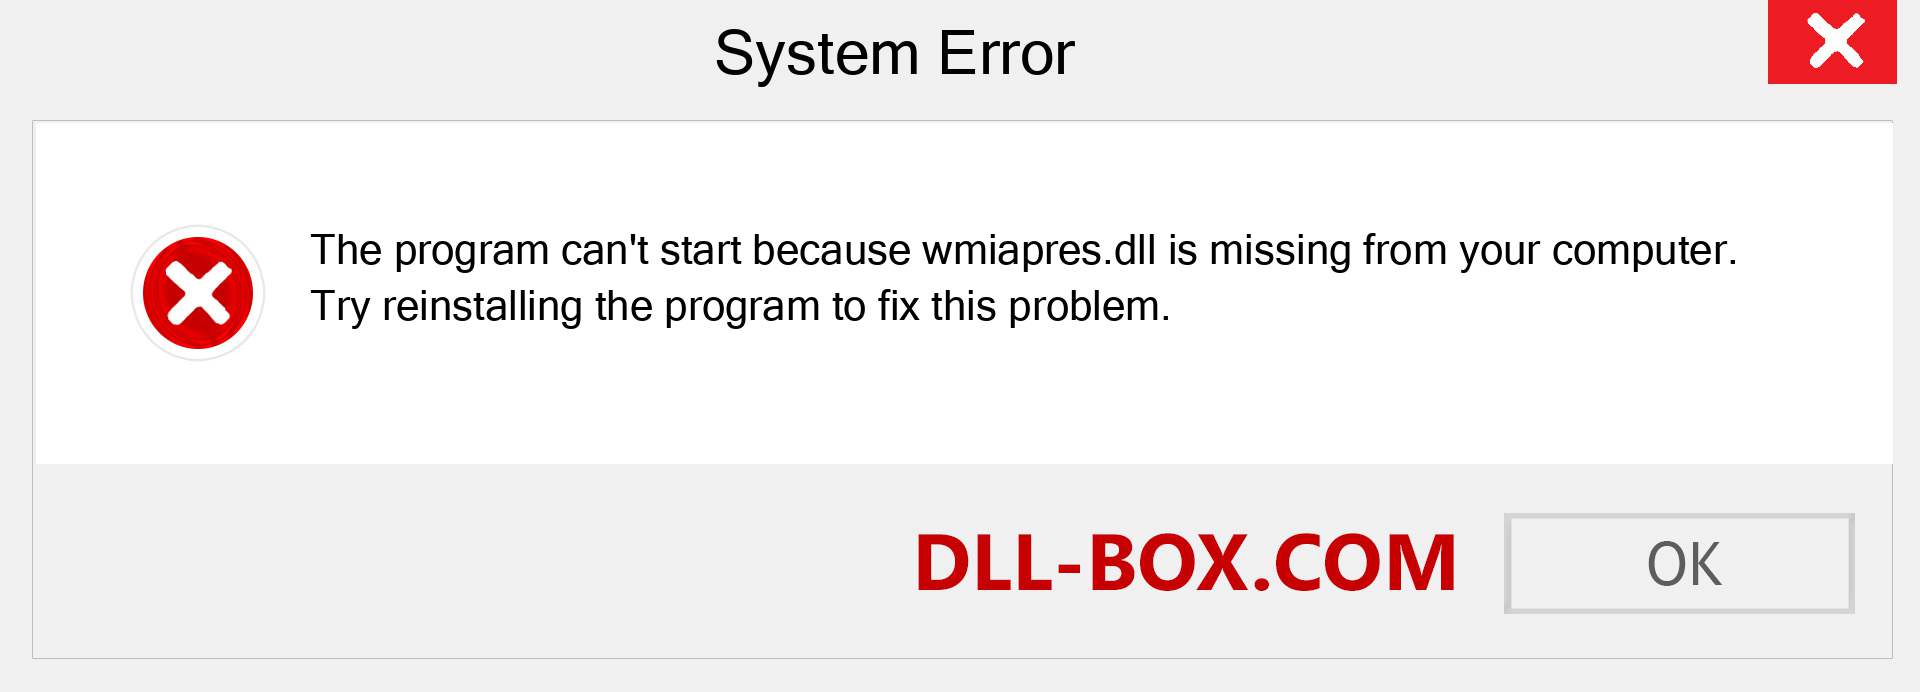  wmiapres.dll file is missing?. Download for Windows 7, 8, 10 - Fix  wmiapres dll Missing Error on Windows, photos, images